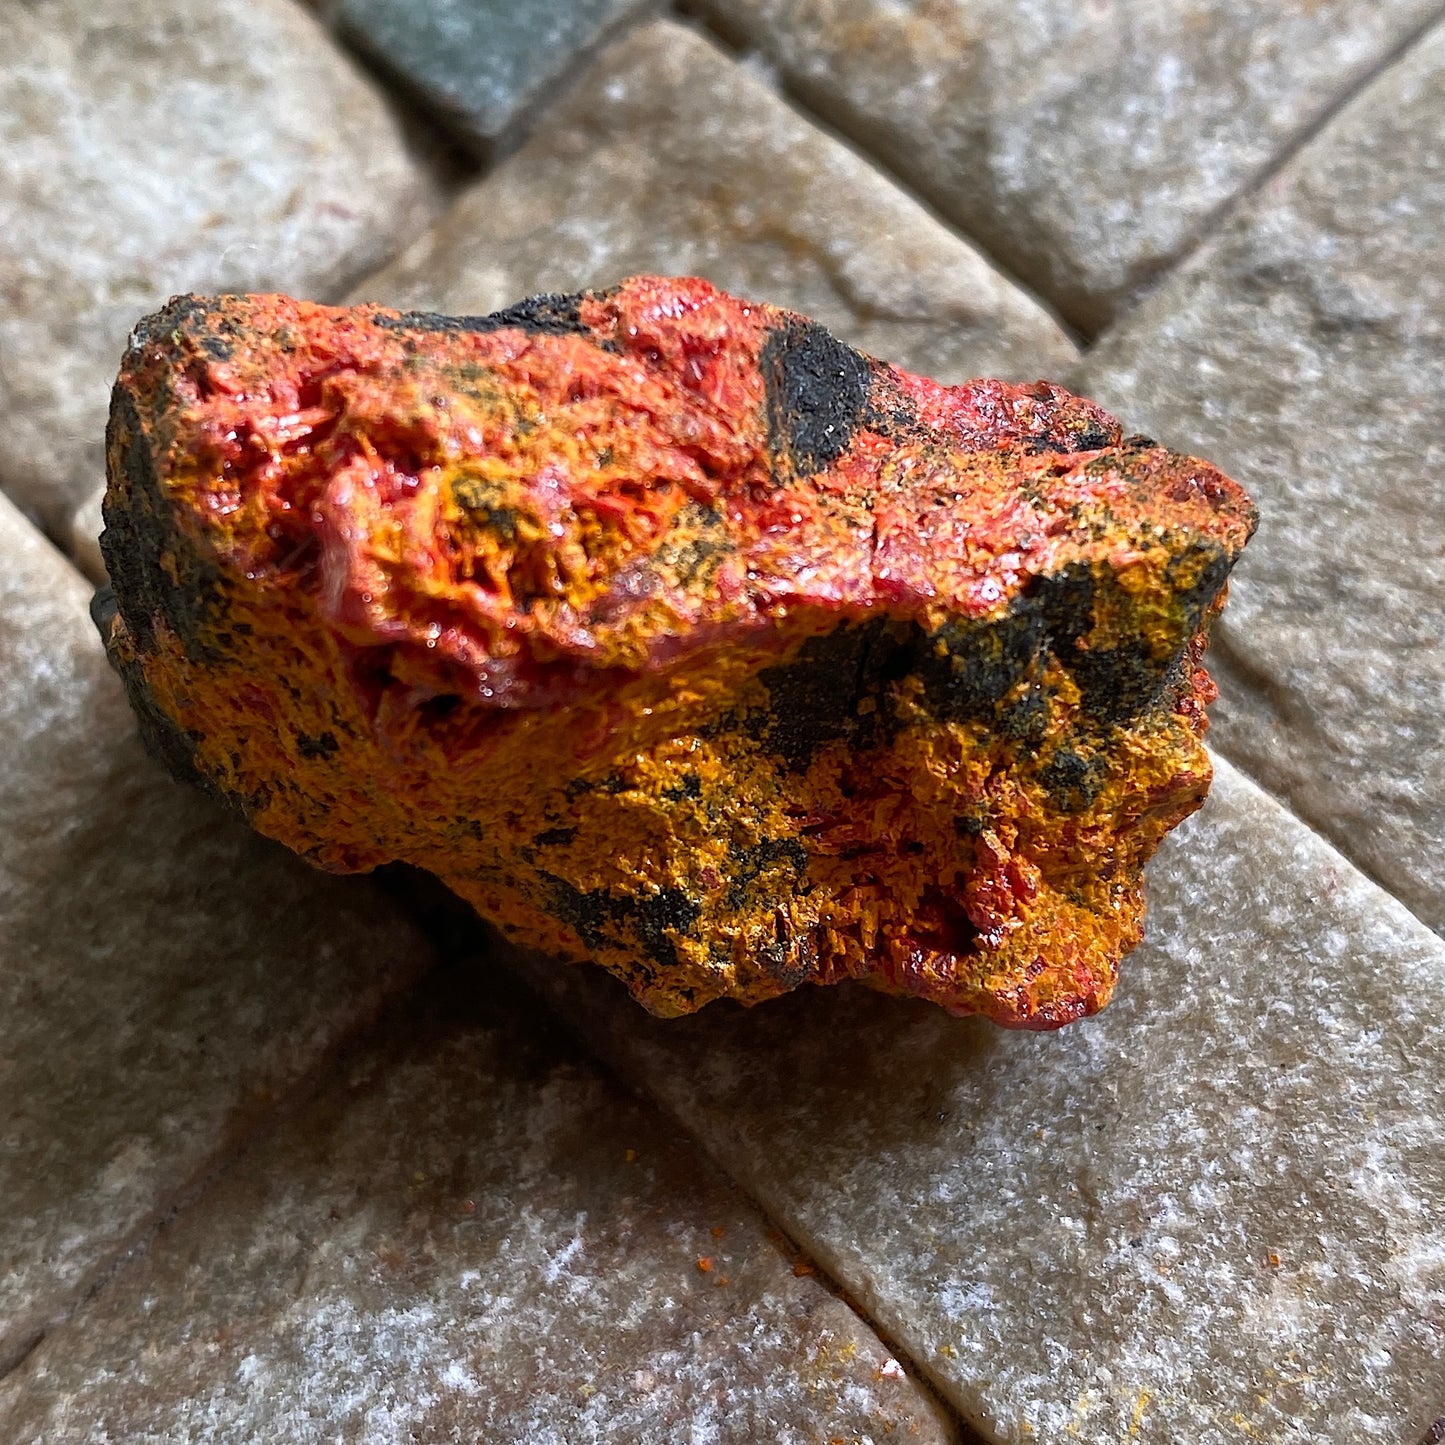 ORPIMENT FROM GETCHEL MINE, NEVADA, U.S.A. 18g MF1385